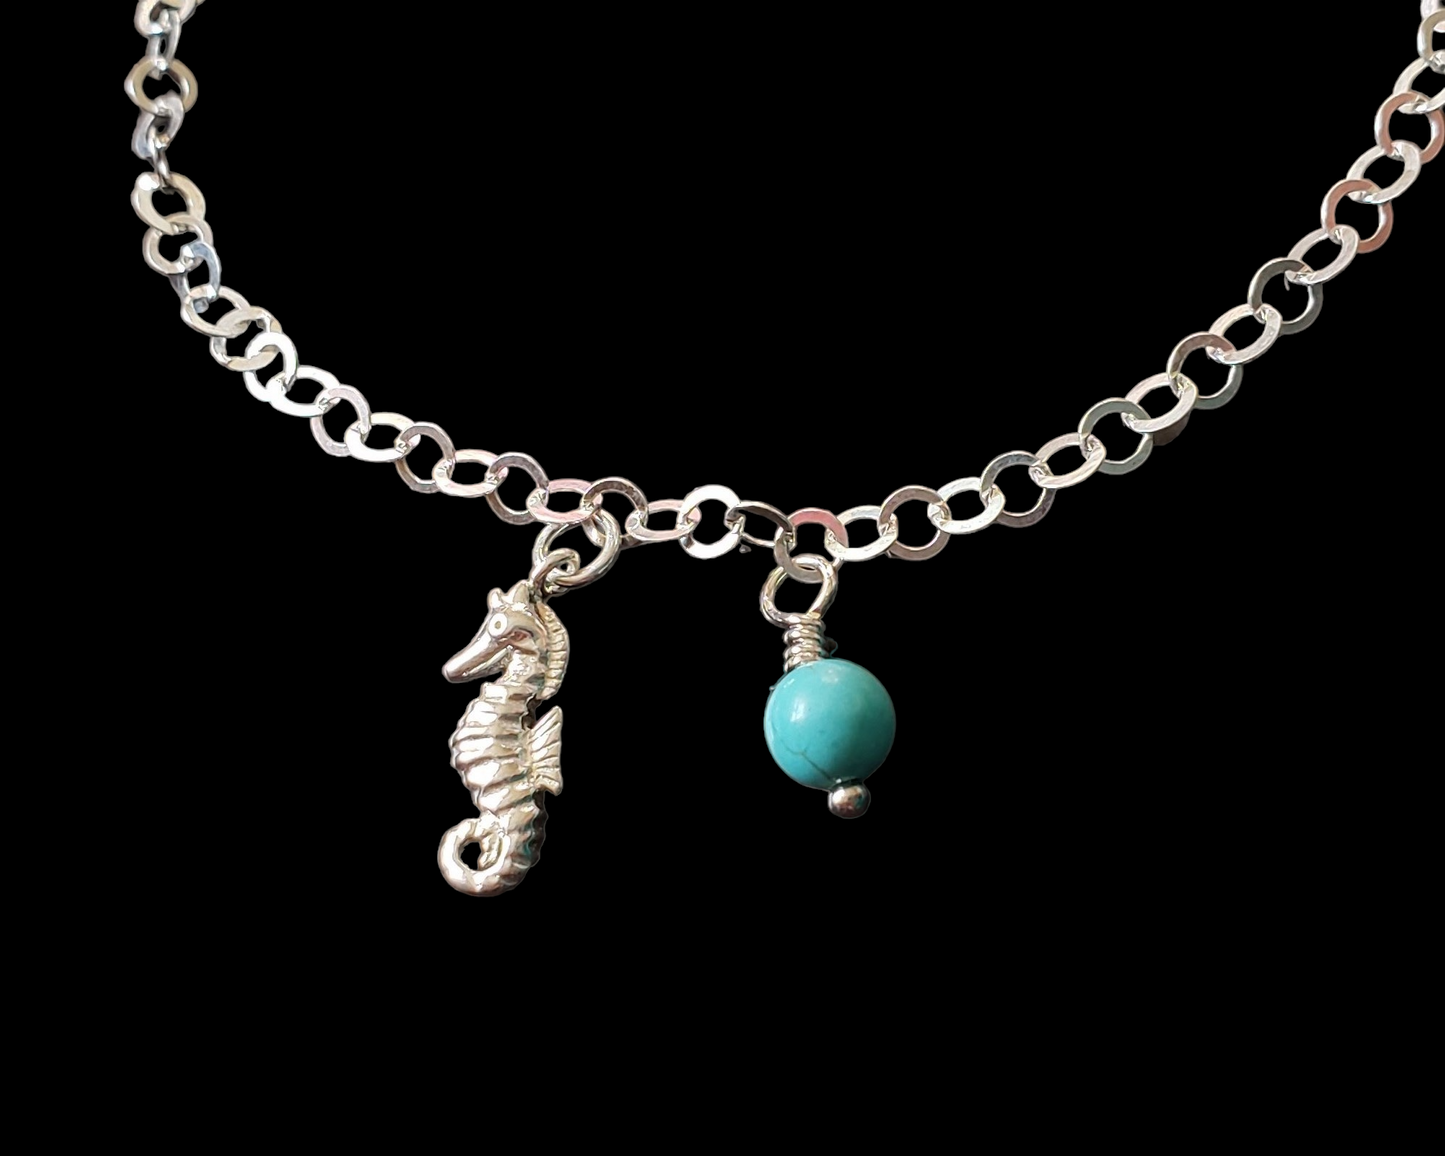  Deluxe Personalized Seahorse Birthstone Eternity Anklet-Ankle Bracelet, Chain and Charm style anklet